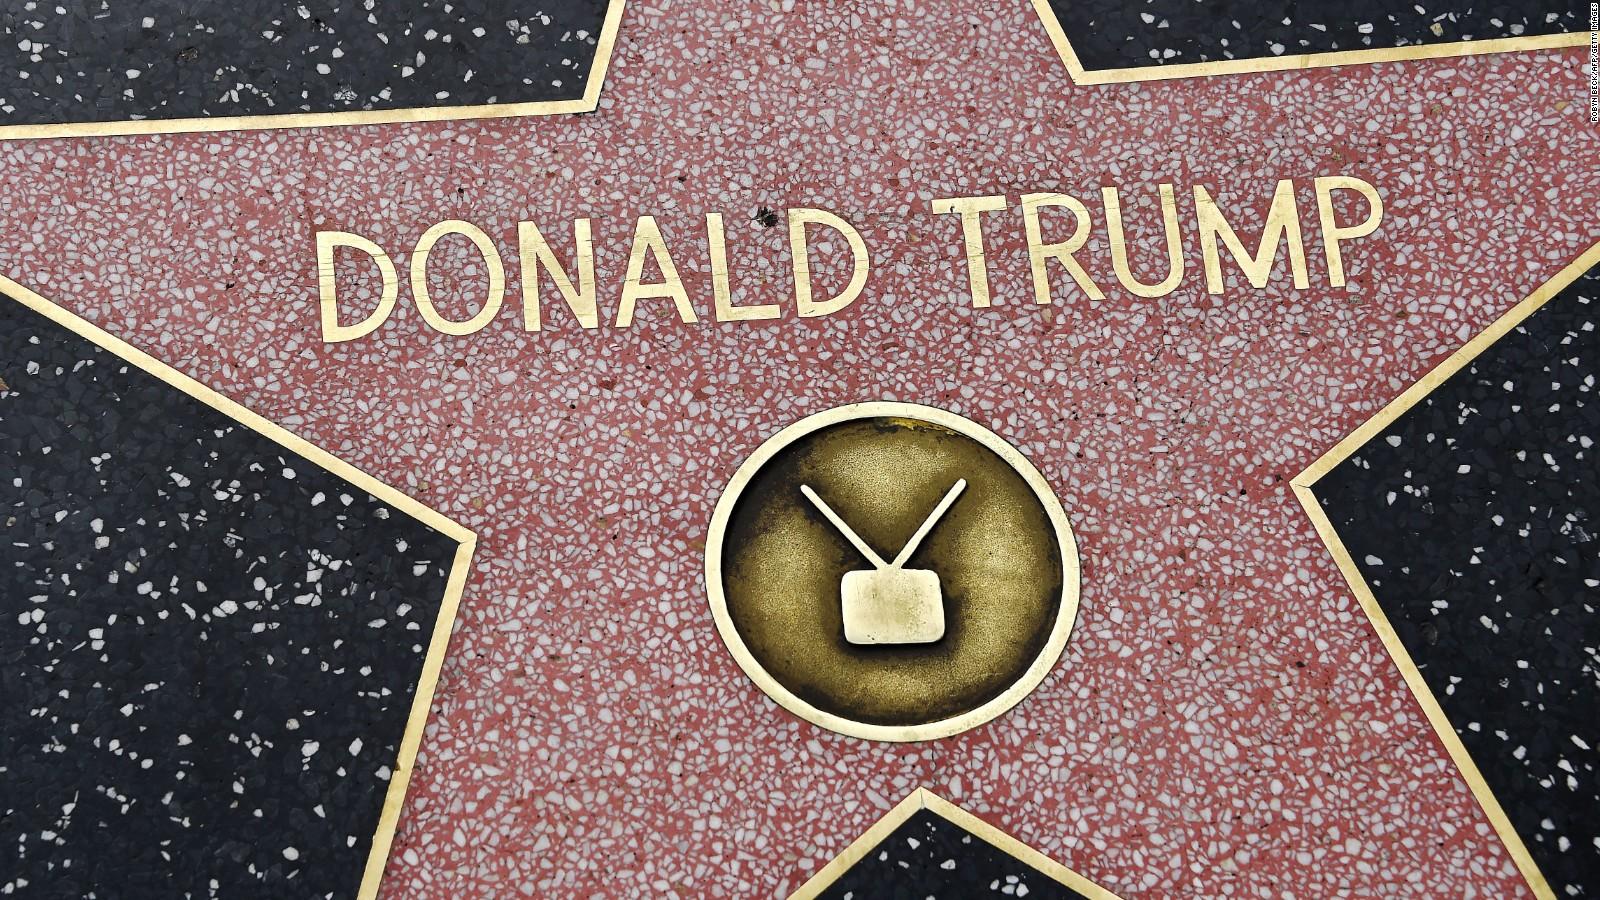 Trump’s Hollywood star getting mixed reactions